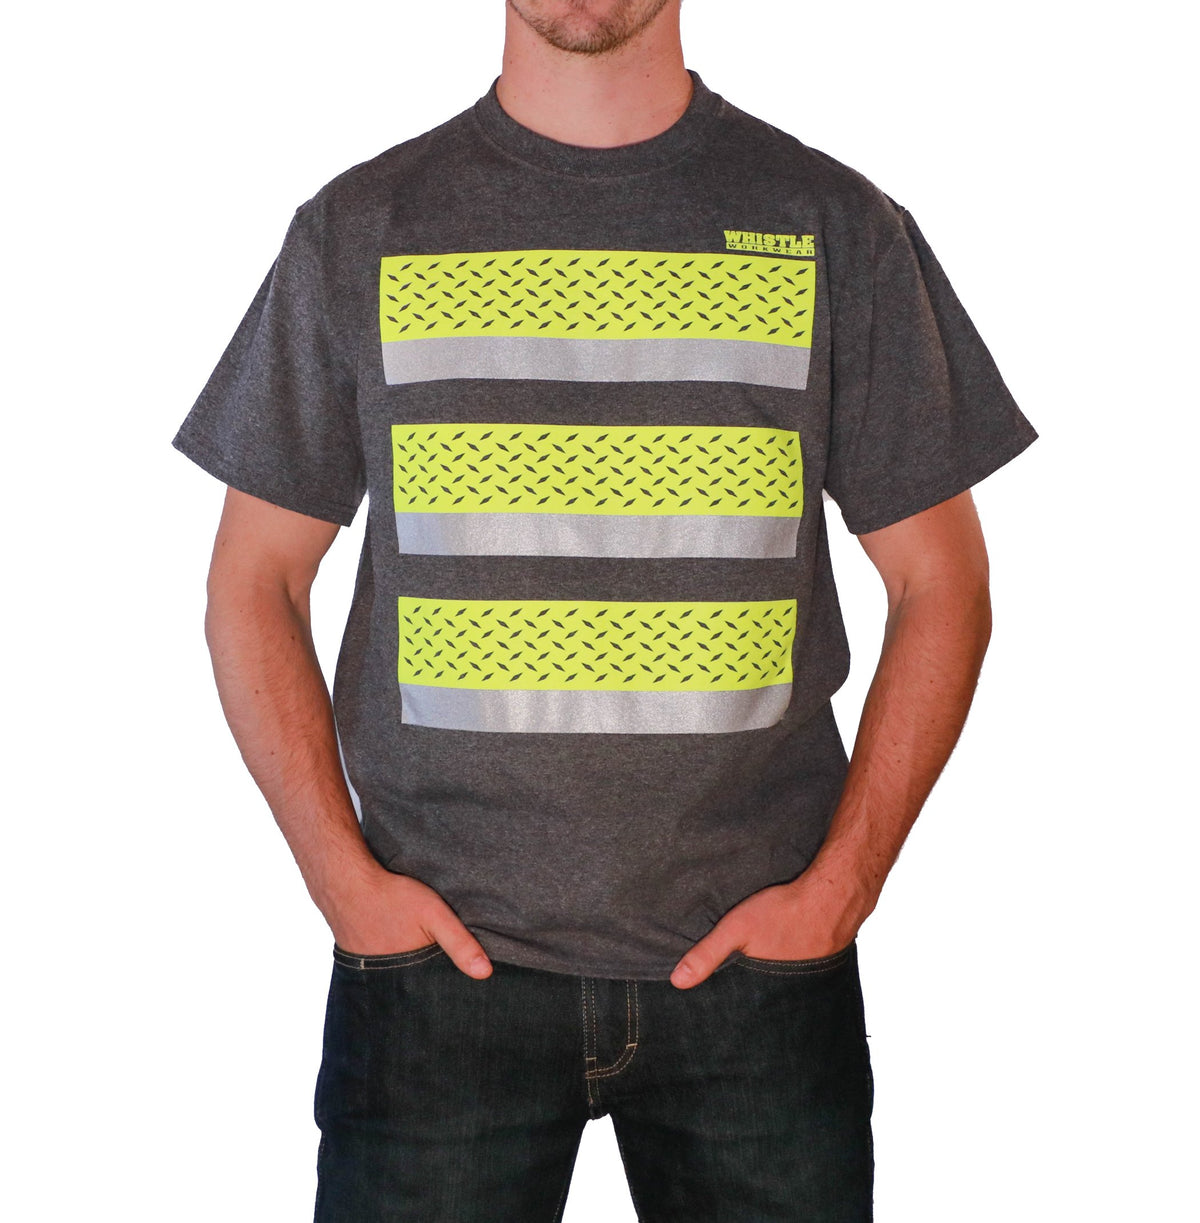 Whistle Workwear Safety Diamond Plate Short Sleeve T-Shirt_Heather Charcoal - Work World - Workwear, Work Boots, Safety Gear